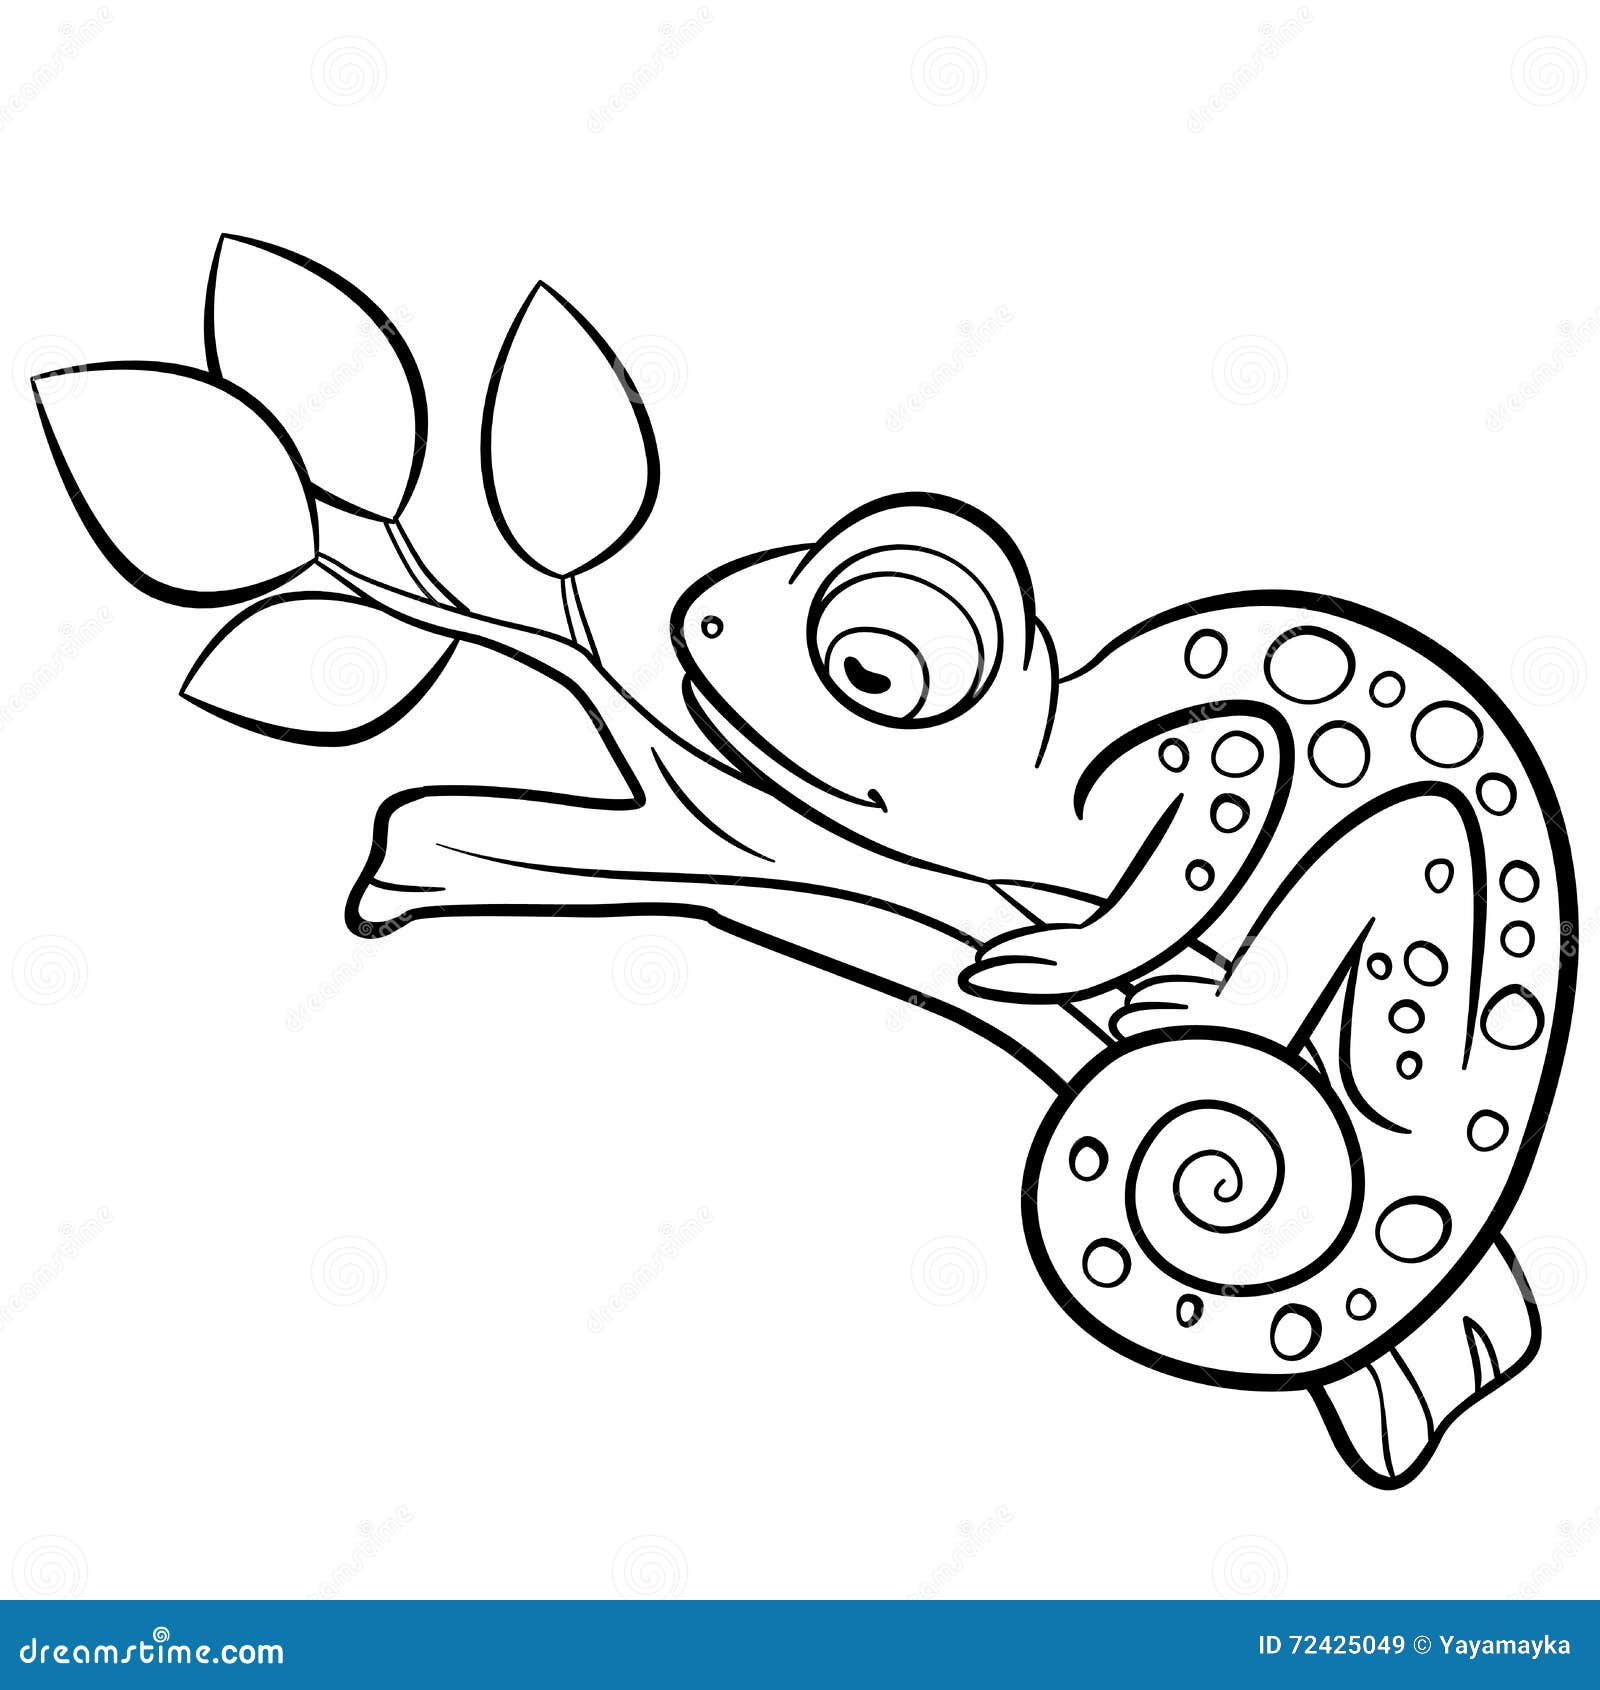 Coloring Pages. Wild Animals. Little Cute Chameleon. Stock Illustration -  Illustration of camouflage, animal: 72425049